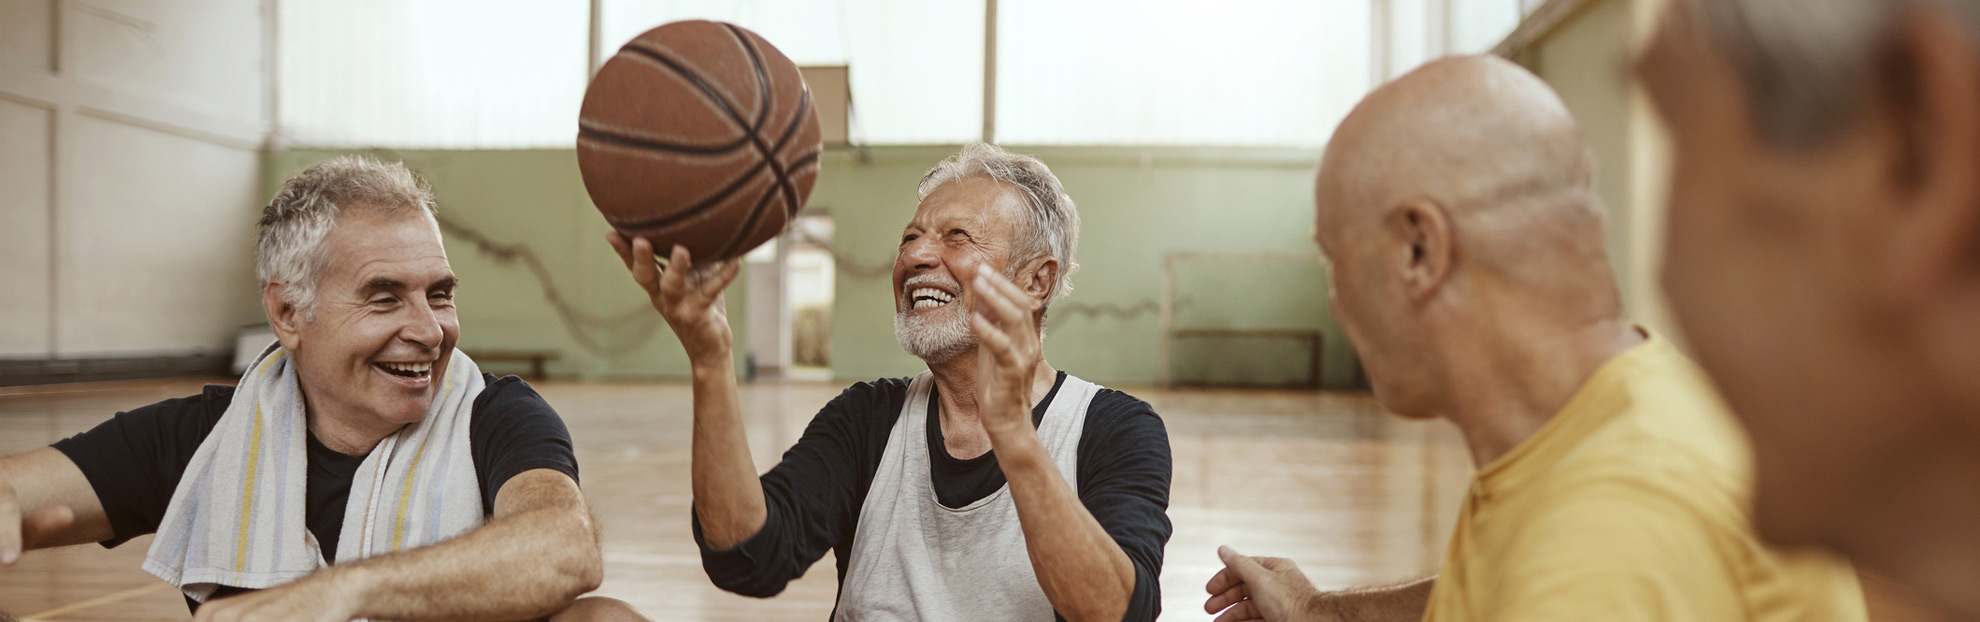 Male cataract surgery patients playing with basketball